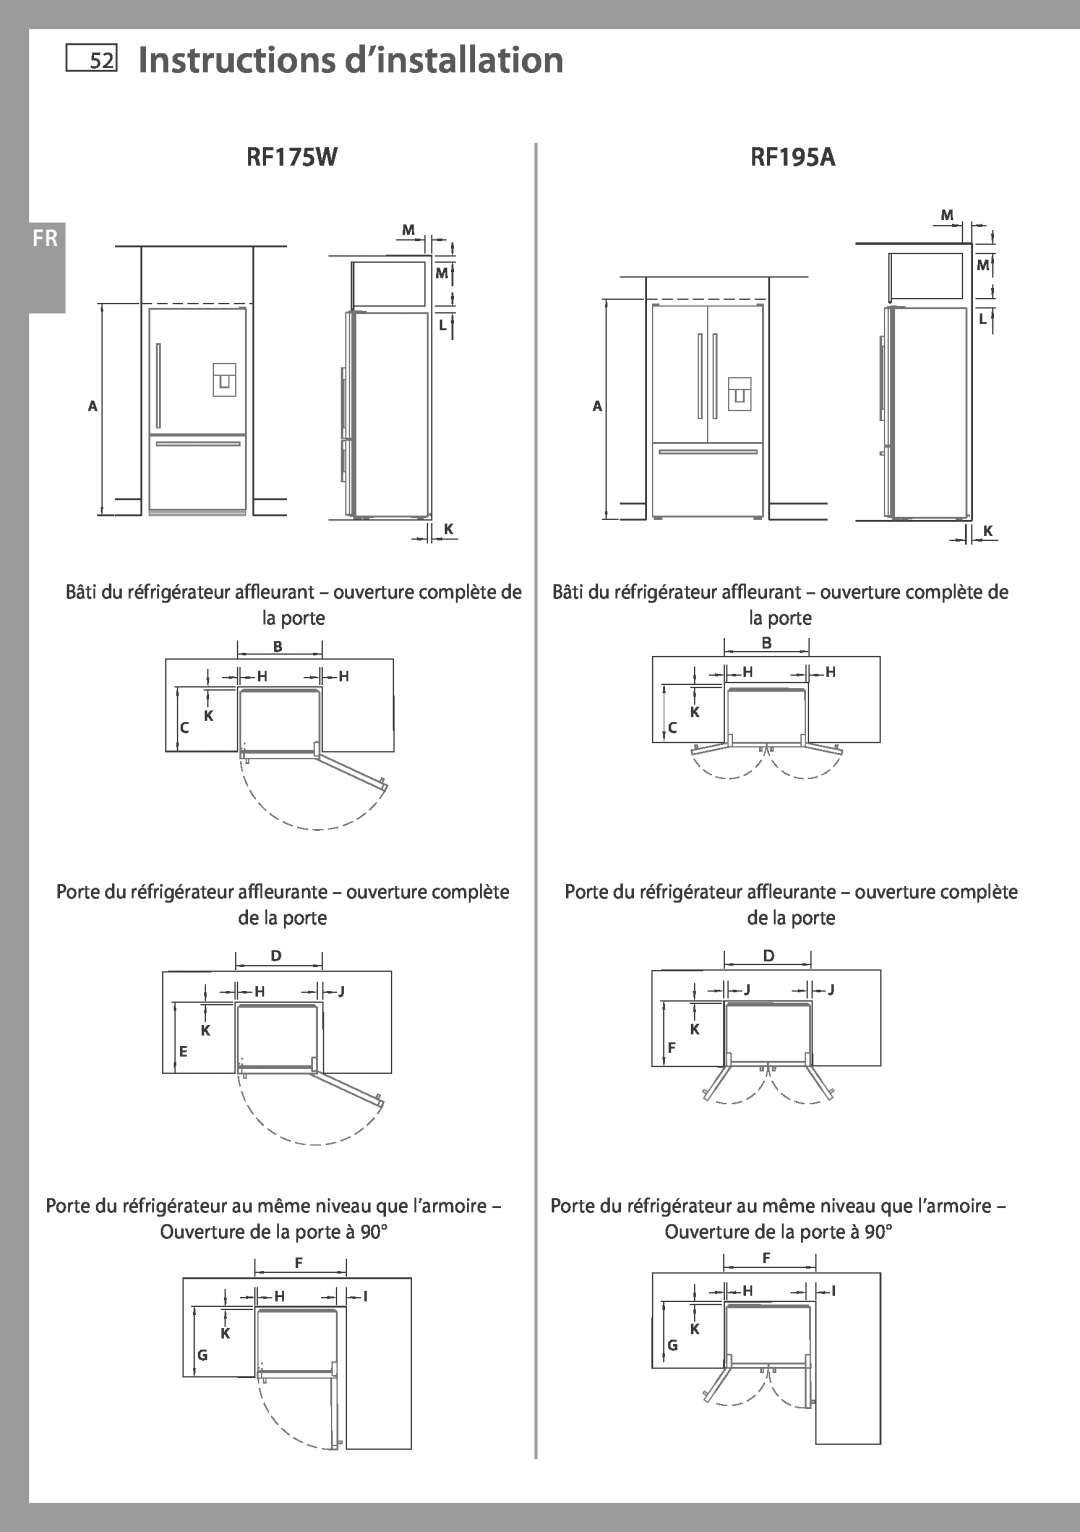 Fisher & Paykel RF175W installation instructions 52Instructions d’installation, RF195A 